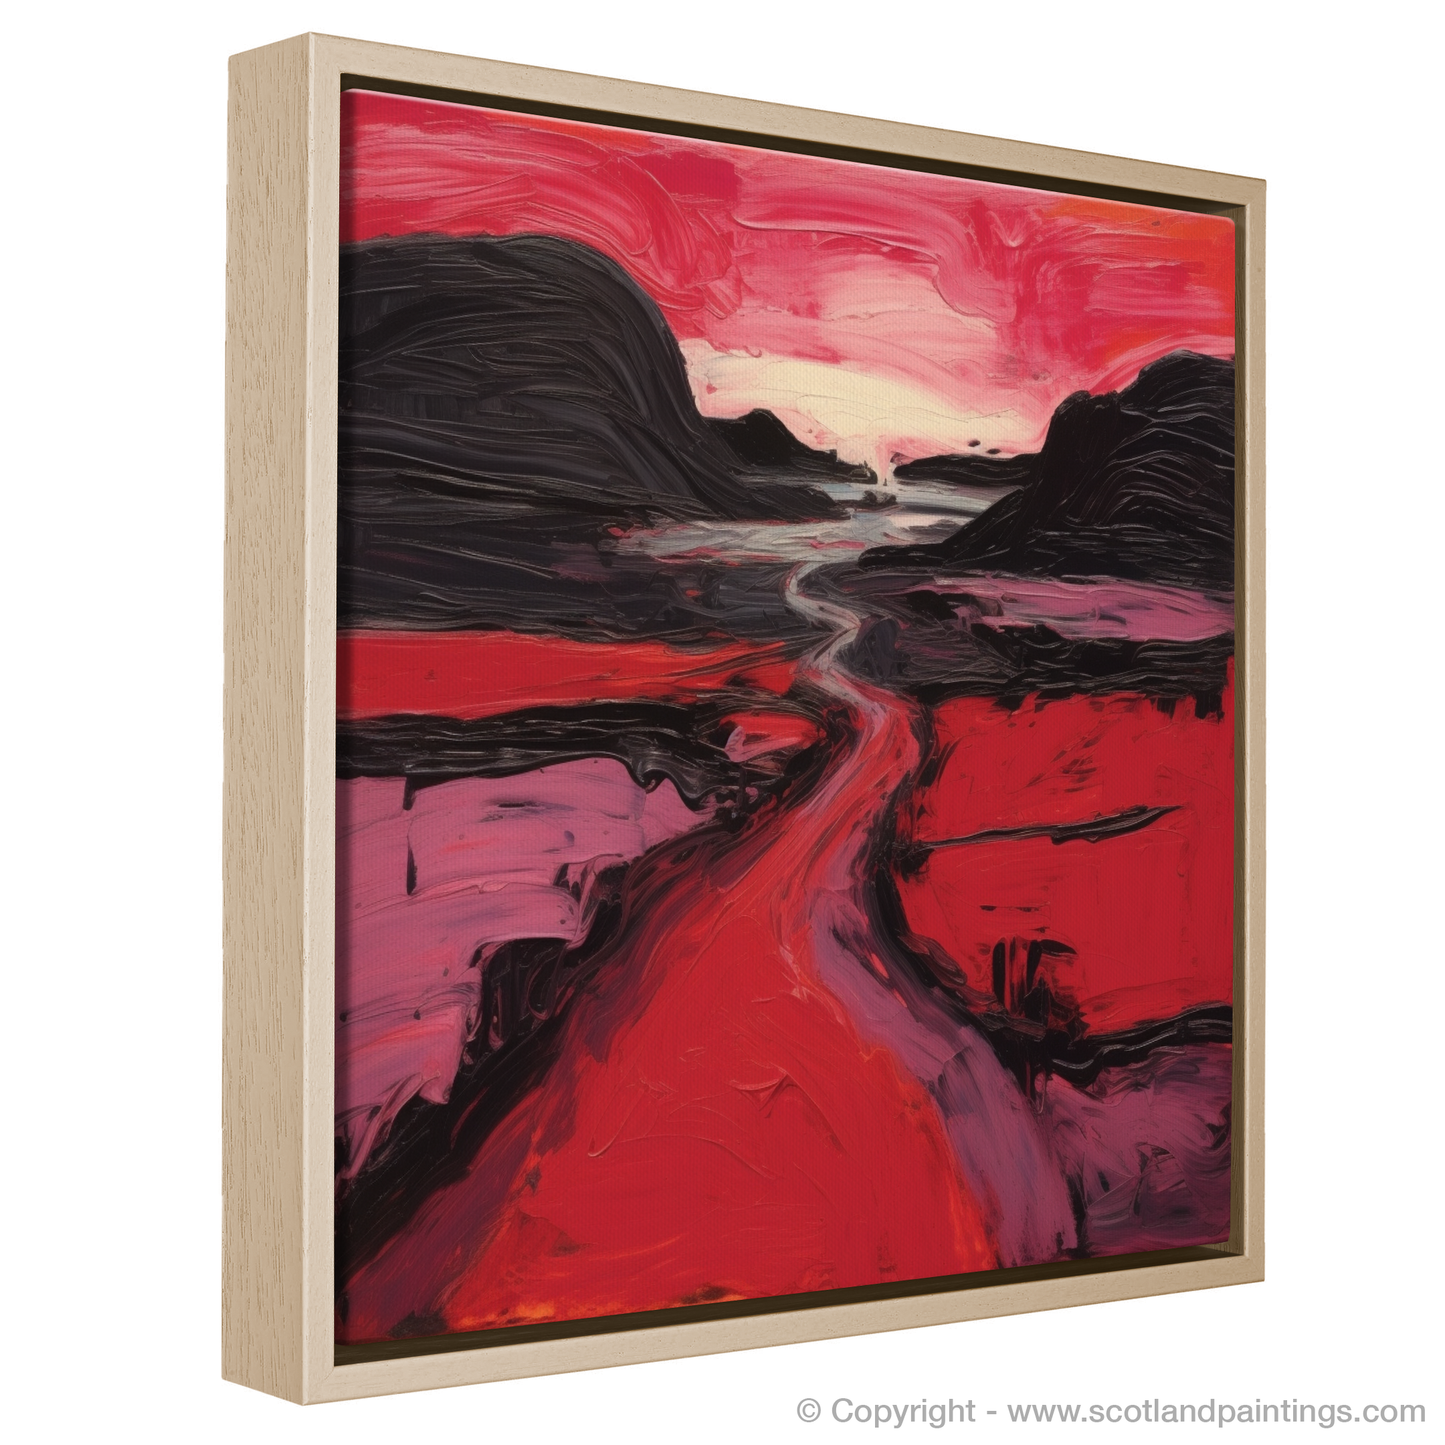 Heart of Ayrshire: An Abstract Expressionist Journey into Loch Doon